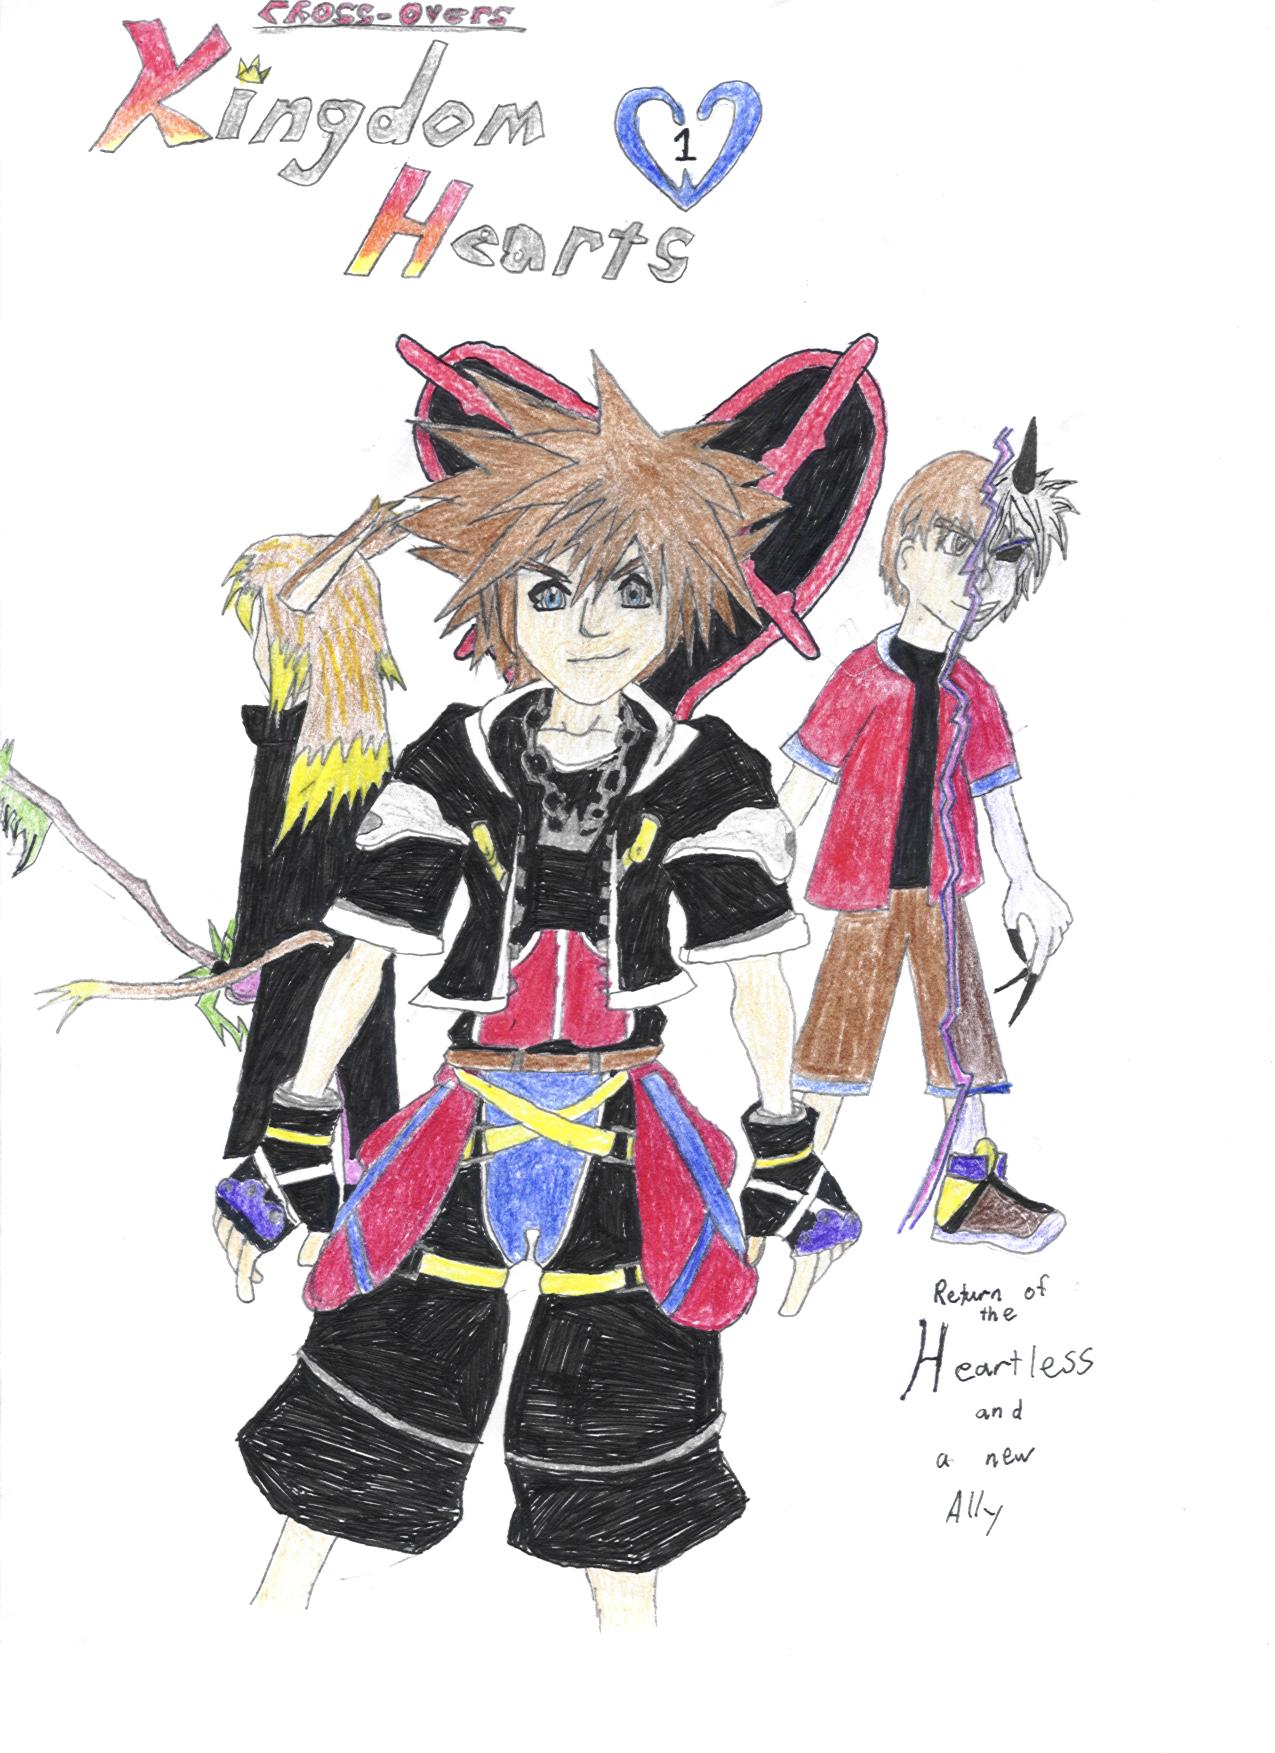 Crossovers: Kingdom Hearts Comic Cover by LordOfDarkness_61